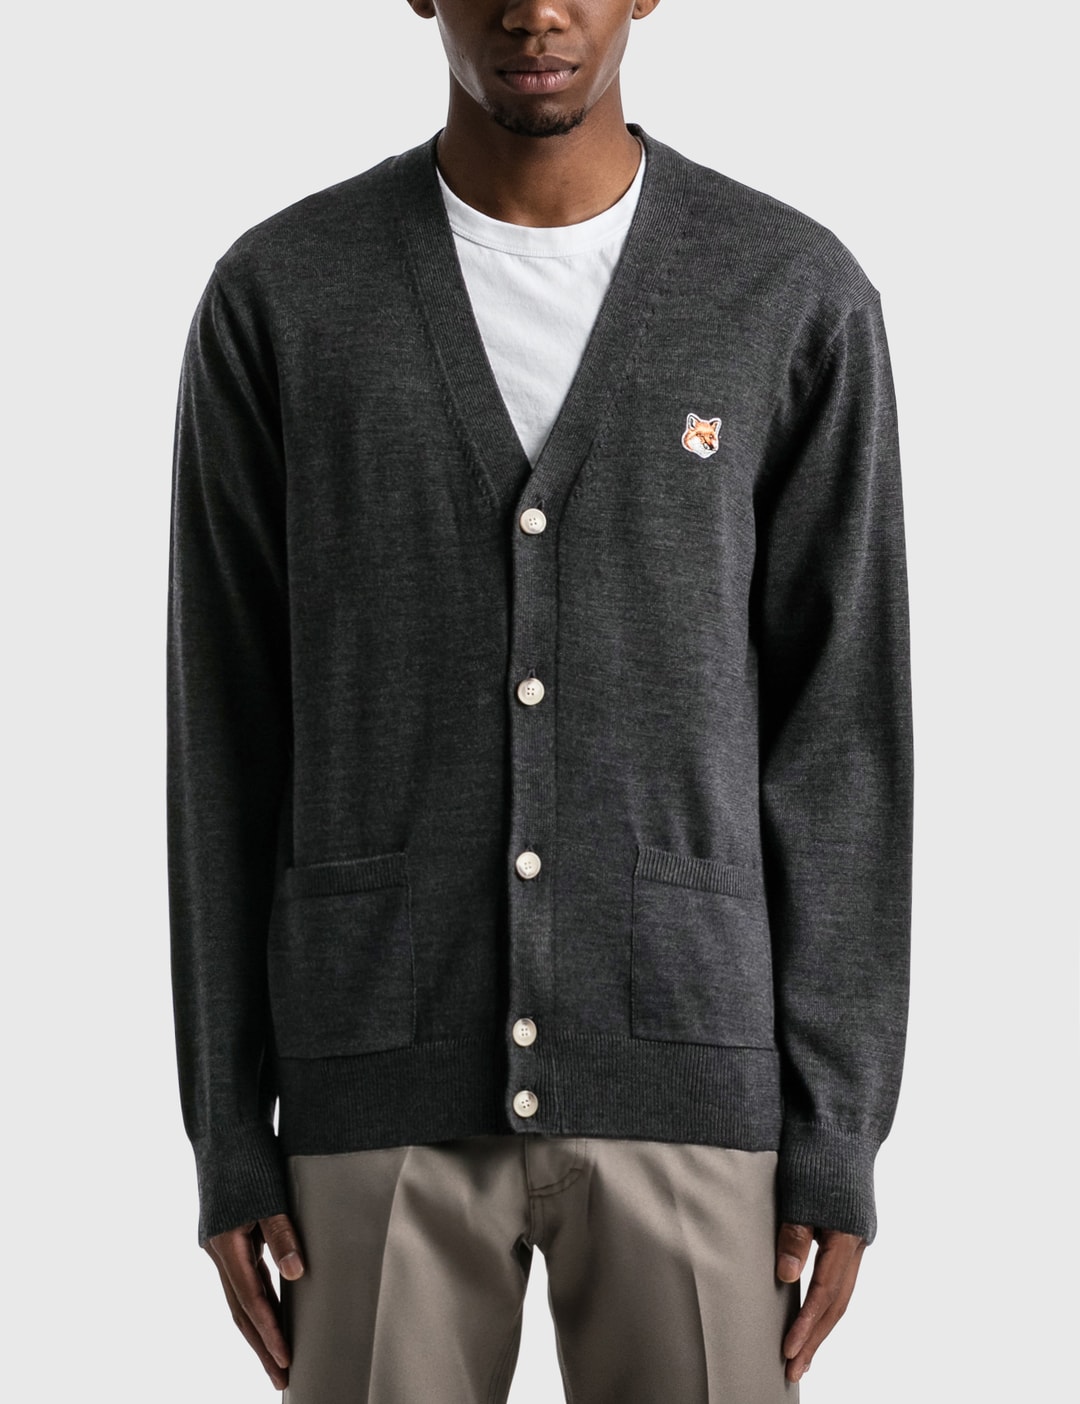 campaign Large universe Care Maison Kitsuné - Fox Head Patch Classic Cardigan | HBX - Globally Curated  Fashion and Lifestyle by Hypebeast